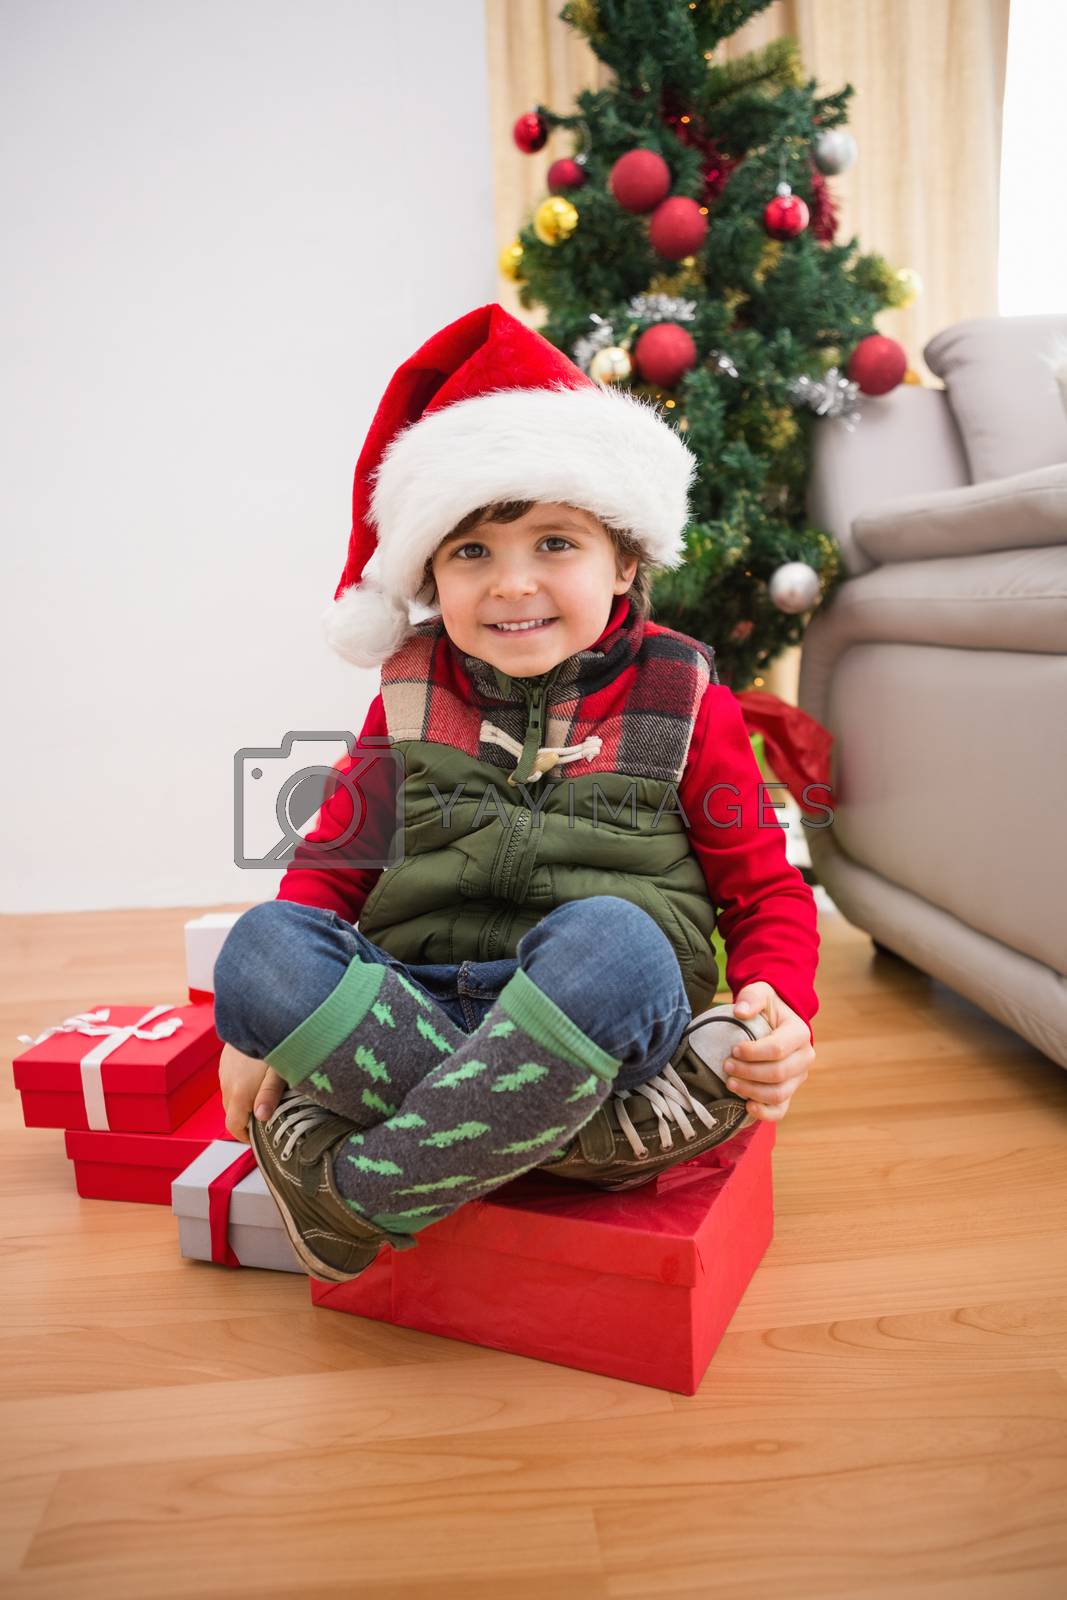 Royalty free image of Cute festive little boy smiling at camera by Wavebreakmedia